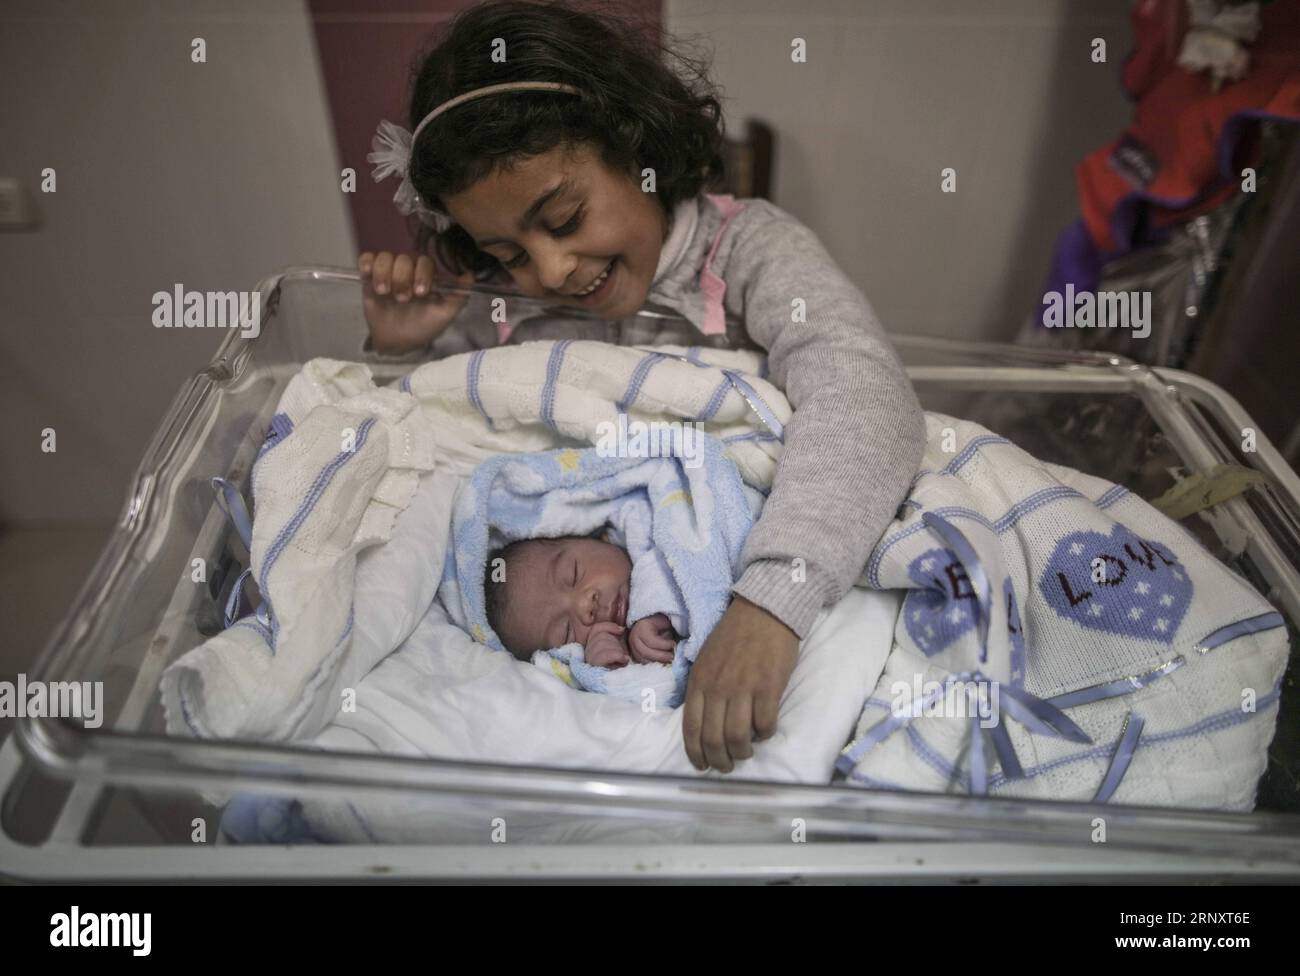 (180211) -- GAZA, Feb. 11, 2018 -- A Palestinian newborn baby is seen inside a hospital in Gaza City, on Feb. 11, 2018. The test-tube baby, named Mujahid, has been born with the smuggled sperm of his father who has been sentenced for seven years in Israeli jail. Many Palestinian women with husbands serving long terms in Israeli jails have resorted to sneaking sperm out and getting pregnant. ) MIDEAST-GAZA-SPERM SMUGGLING WissamxNassar PUBLICATIONxNOTxINxCHN Stock Photo